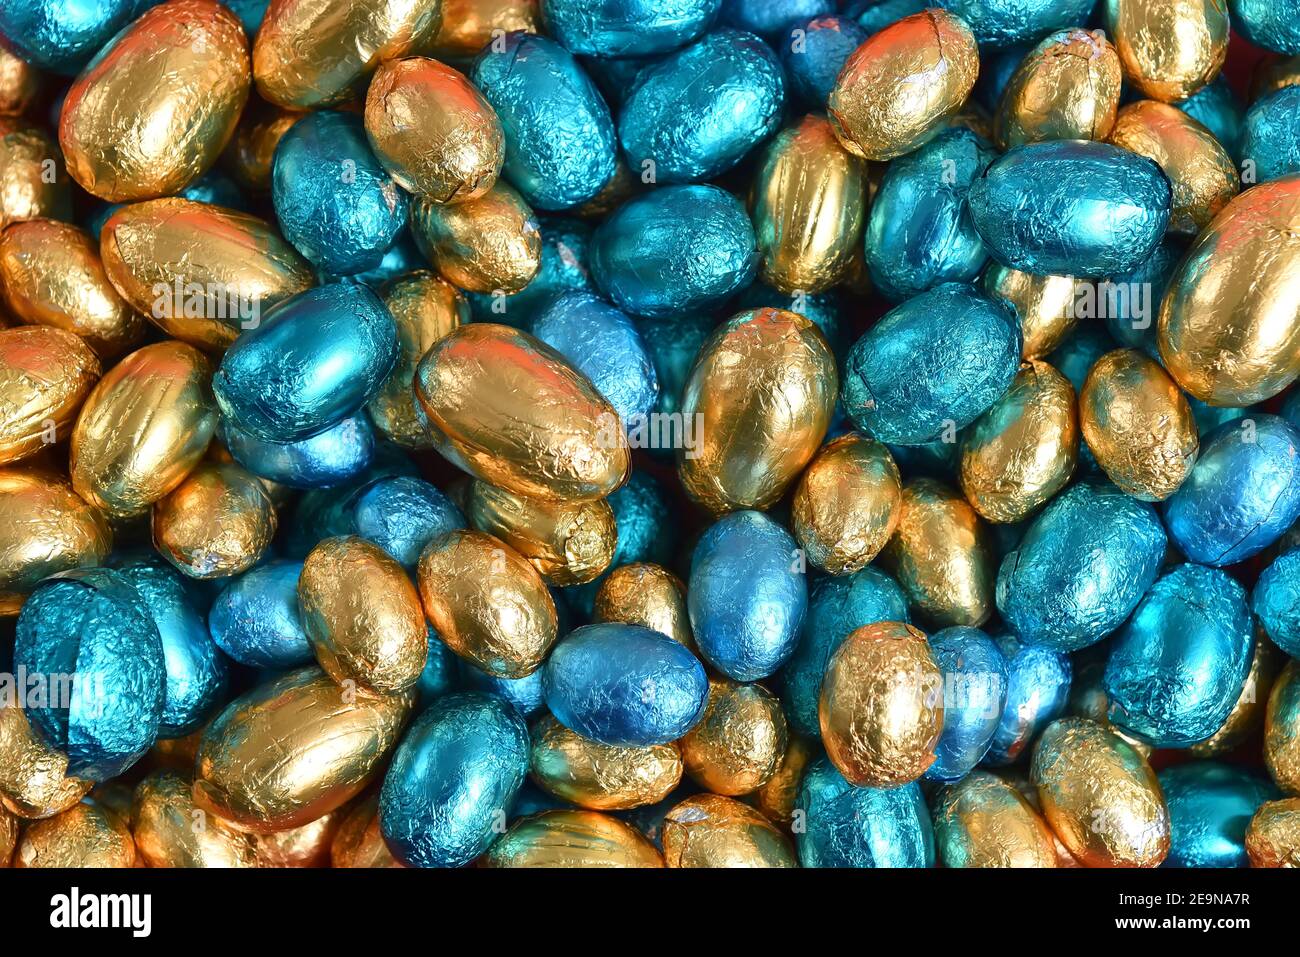 Blue,  gold and turquoise foil wrapped chocolate easter eggs, against a black background. Stock Photo